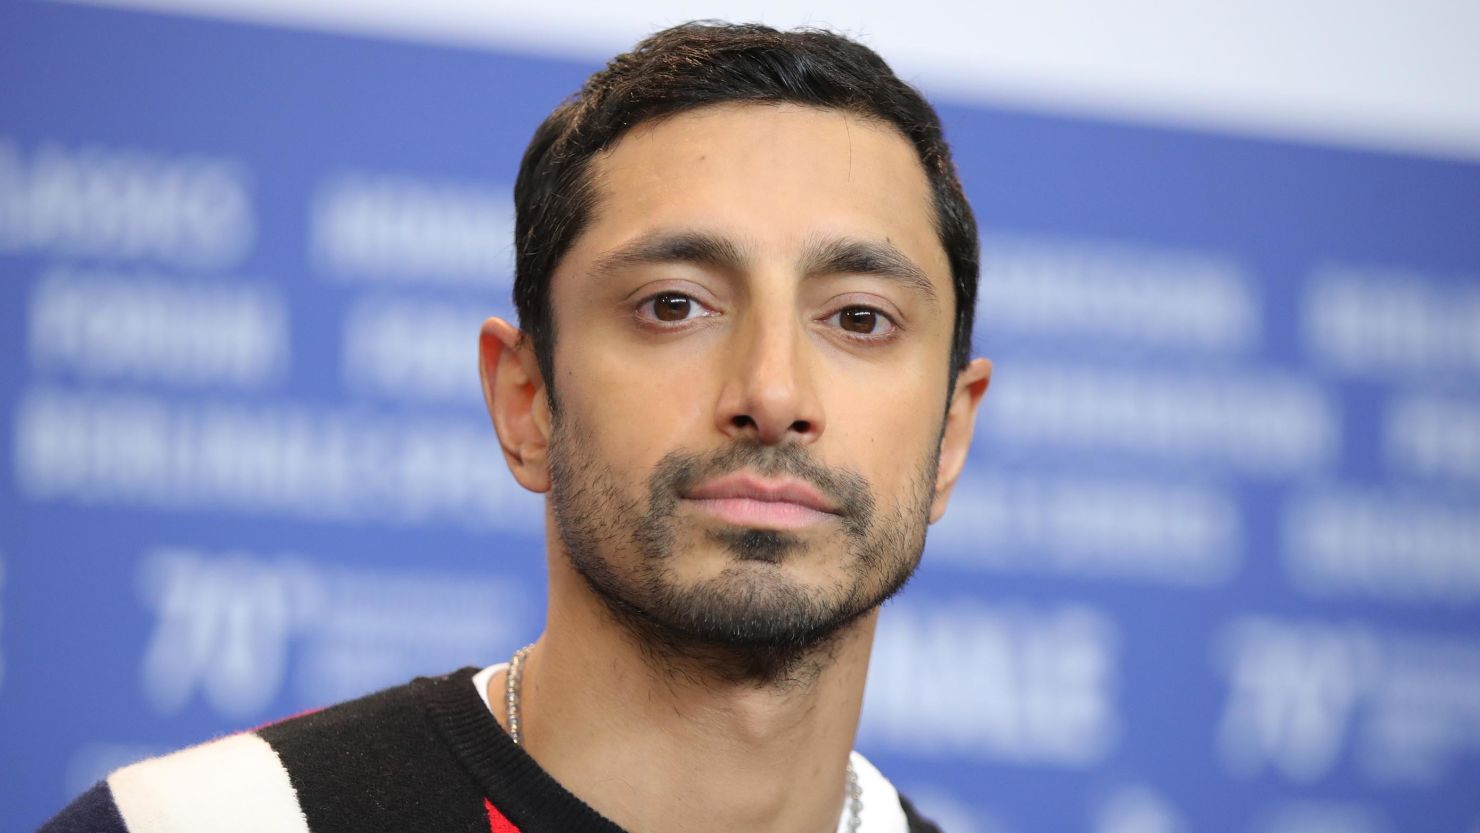 Riz Ahmed, shown here last February, is newly married. (Photo by Andreas Rentz/Getty Images)